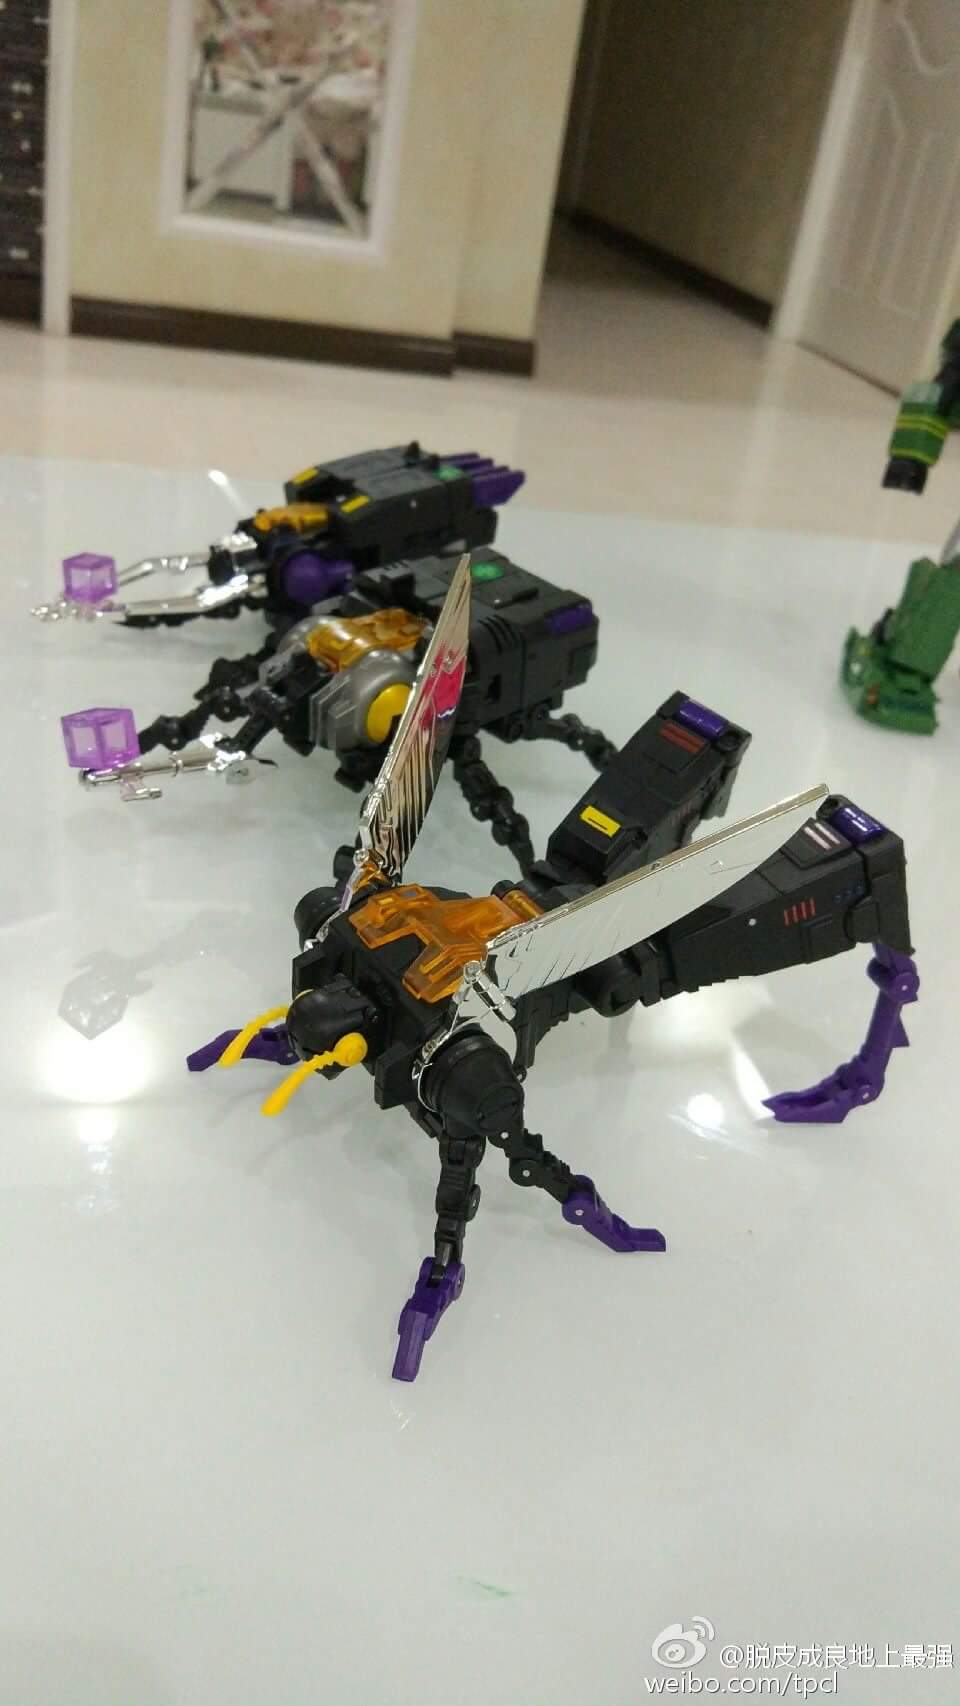 [Fanstoys] Produit Tiers - Jouet FT-12 Grenadier / FT-13 Mercenary / FT-14 Forager - aka Insecticons - Page 4 7xbJmDgP